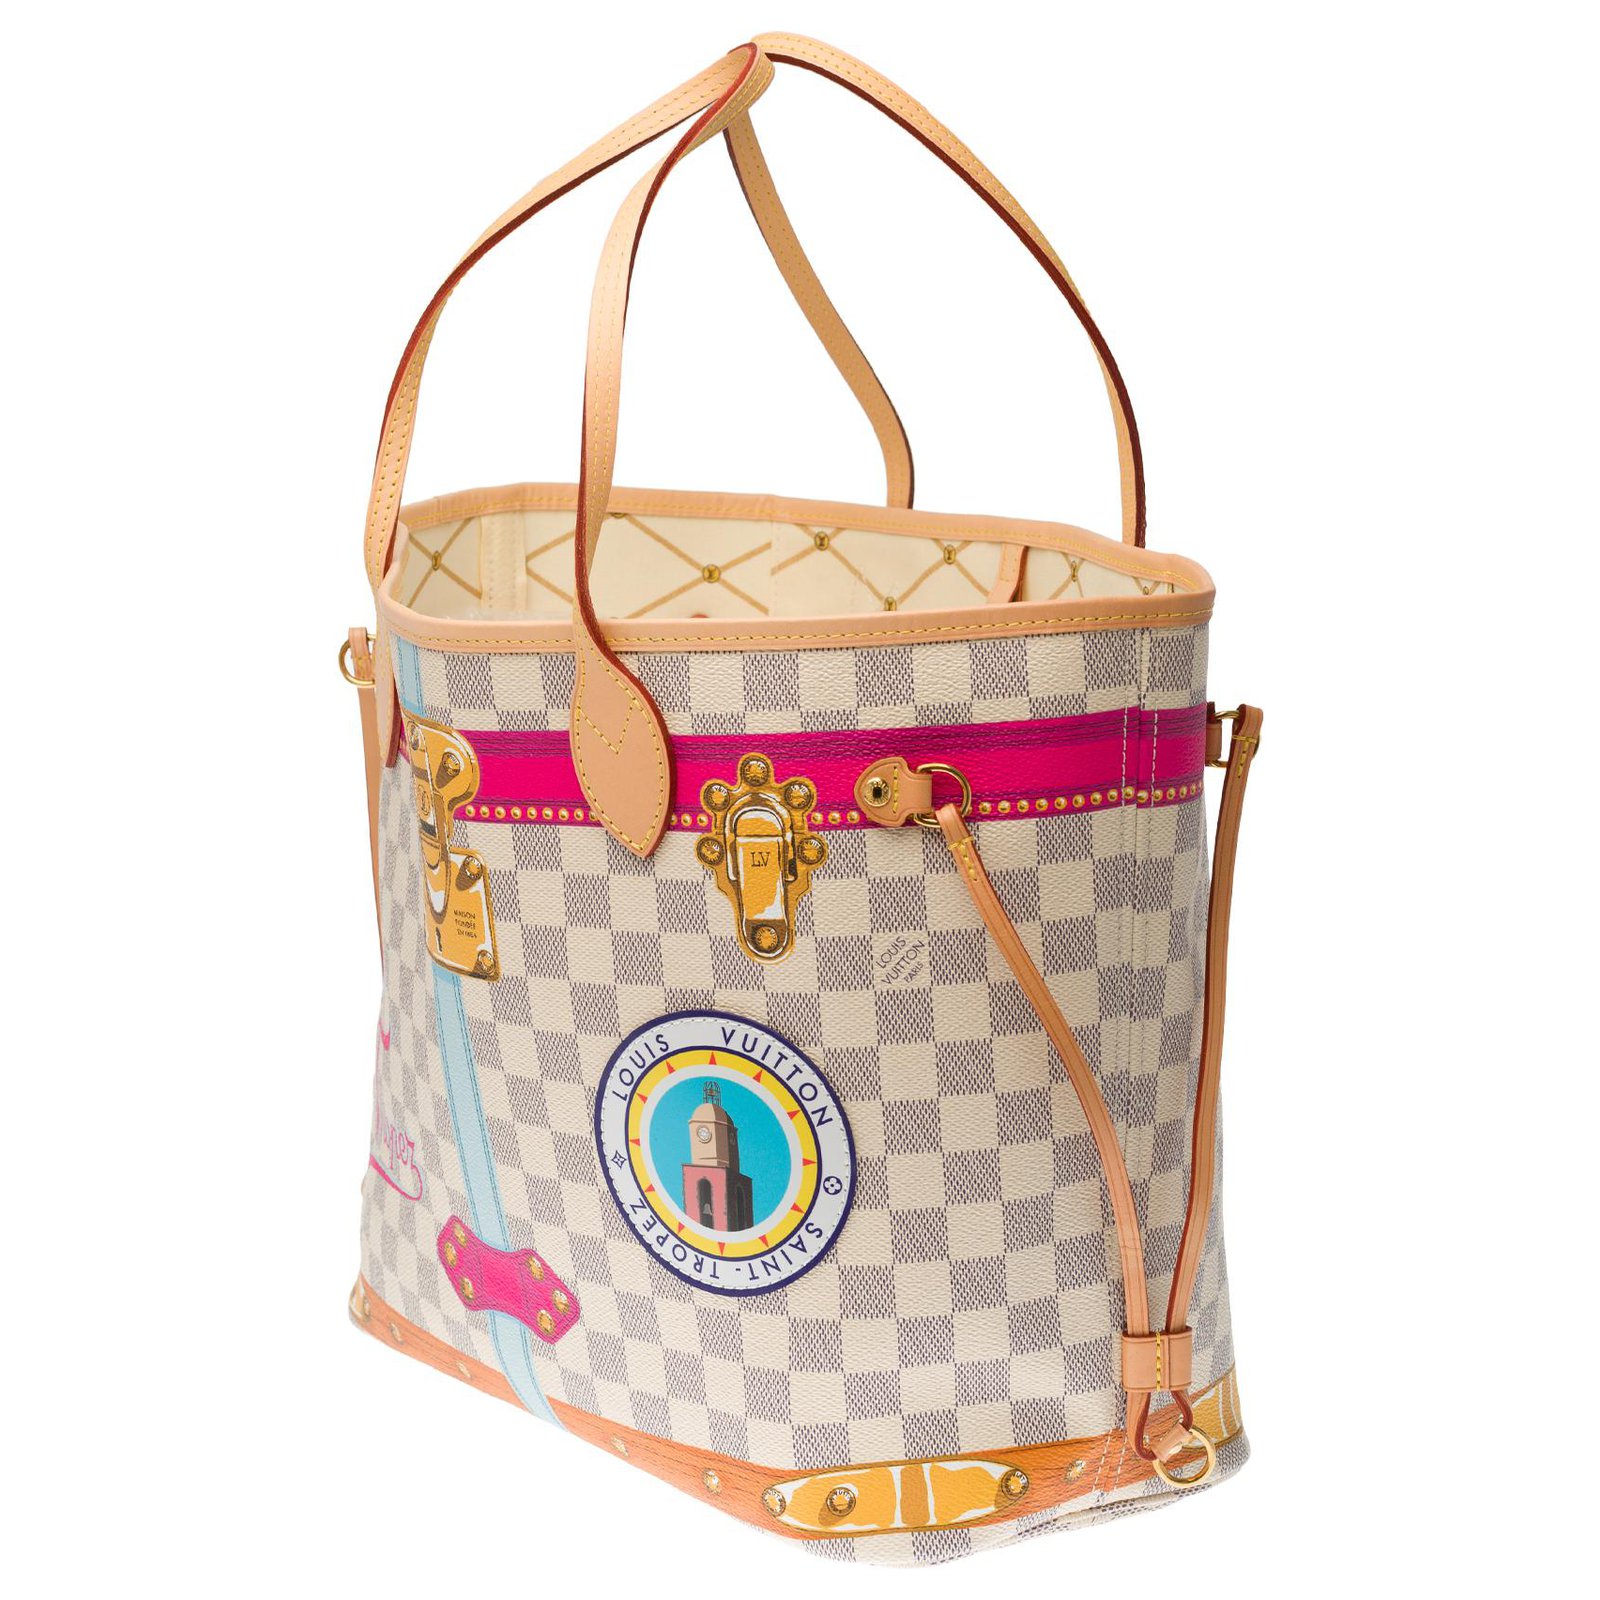 NEW- Collector- Limited edition tote bag Saint-Tropez 2018Louis